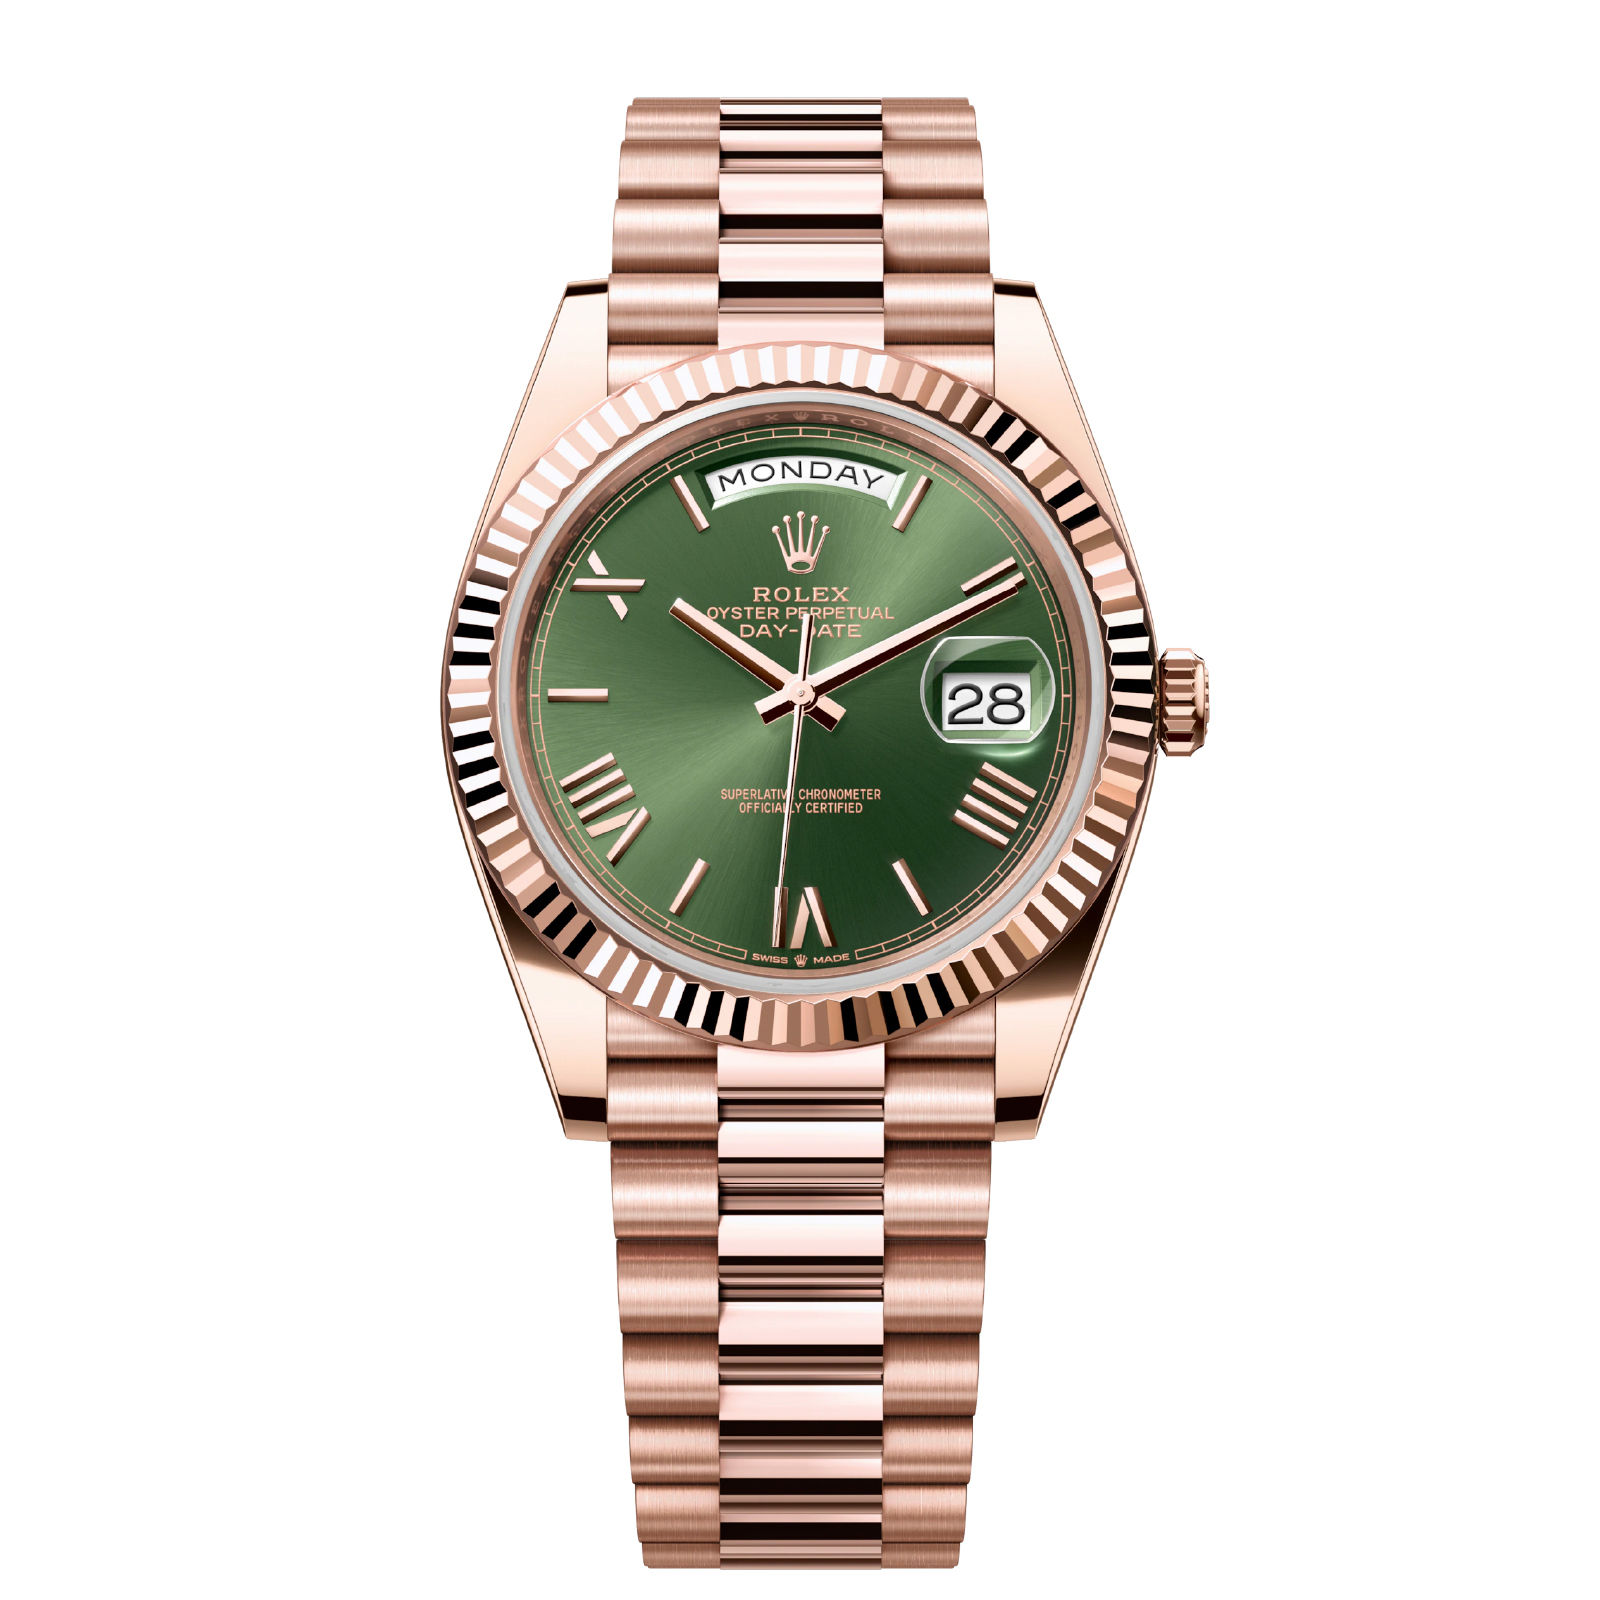 Rolex Day-Date 40MM, Rose Gold, Olive Green Dial | The Watch Meister